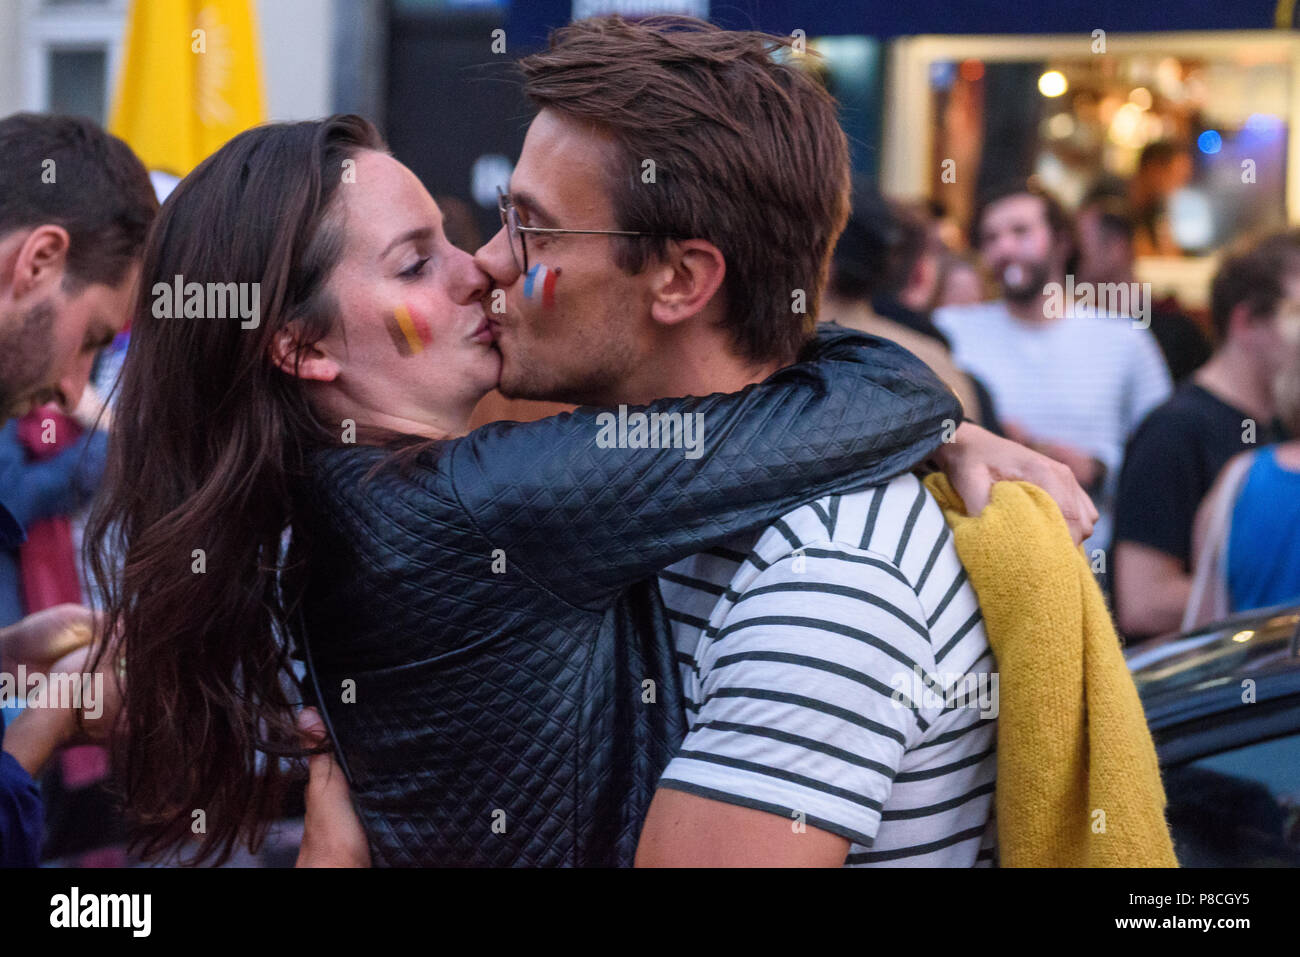 10.07.2018. BRUSSELS, BELGIUM. Football fans of Belgium and France kissing after FIFA WORLD CUP 2018 game between team Belgium and team France. Stock Photo